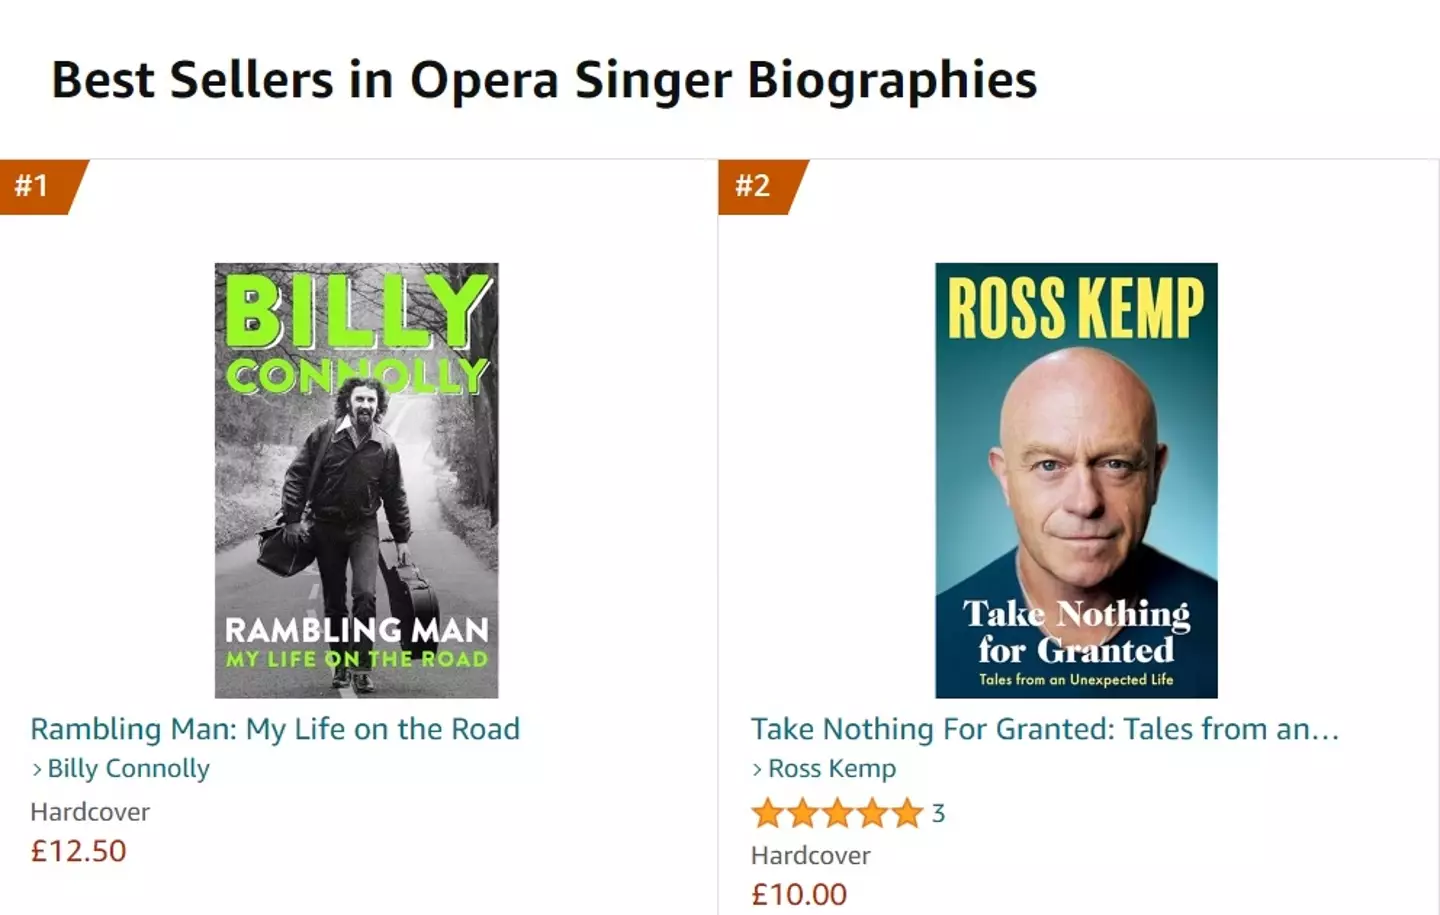 Billy Connolly's new book has shot to the top of Amazon's opera singer biographies chart. Take that Ross Kemp.